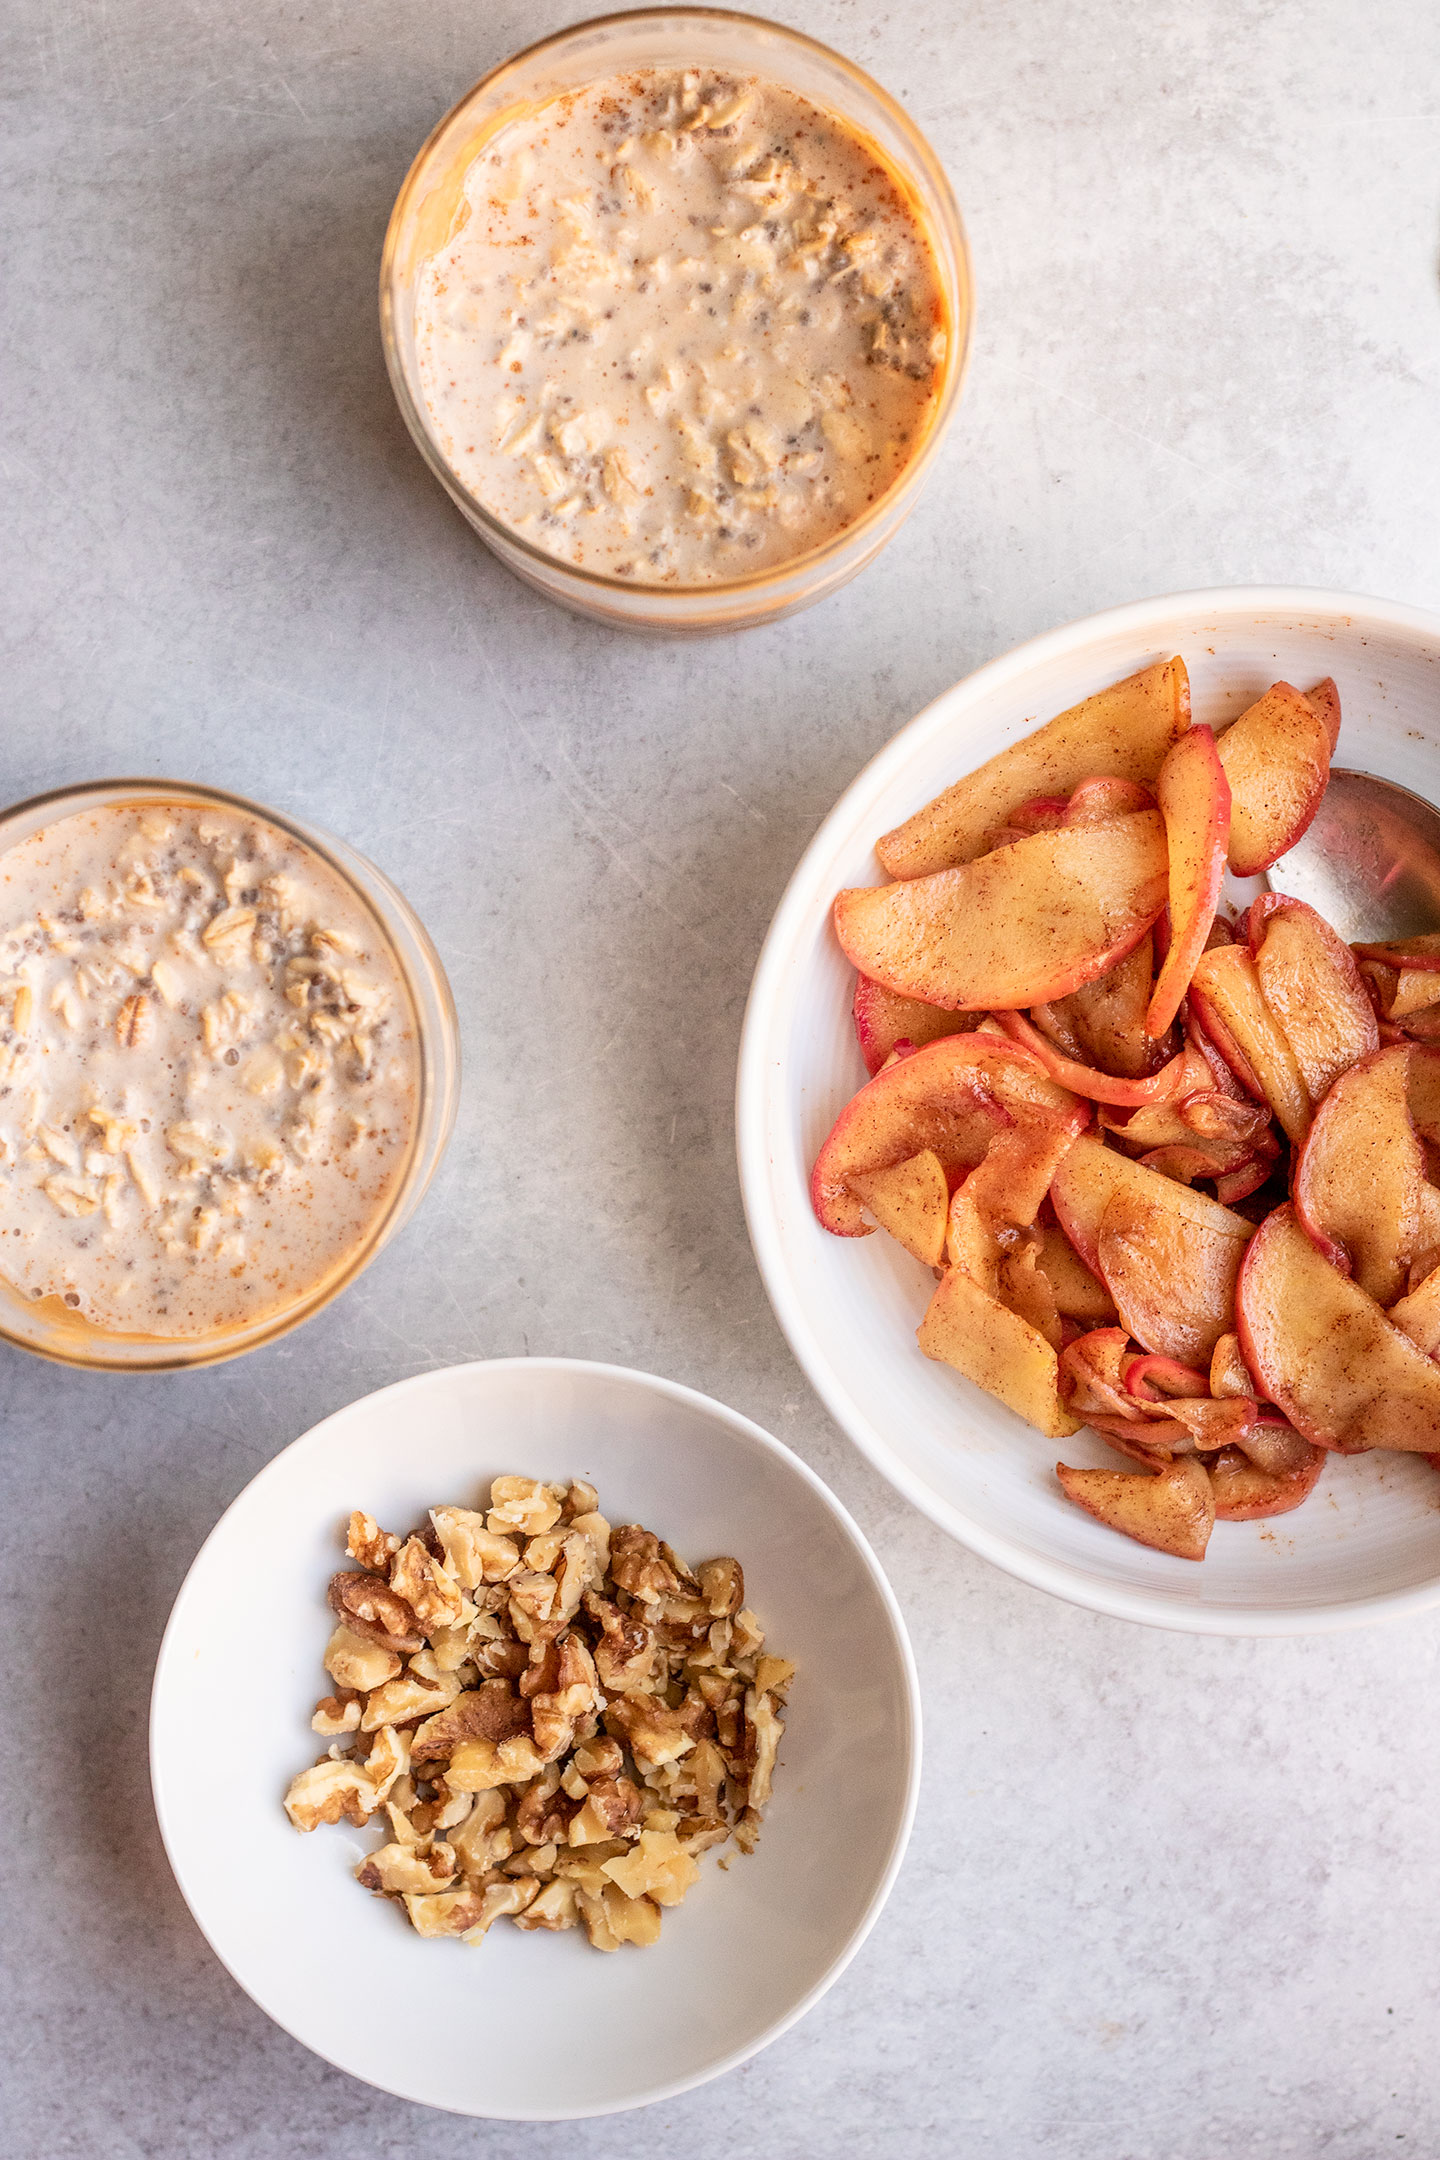 The overnight oats prepped in two jars with the sauteed apples and walnut toppings set to the side.